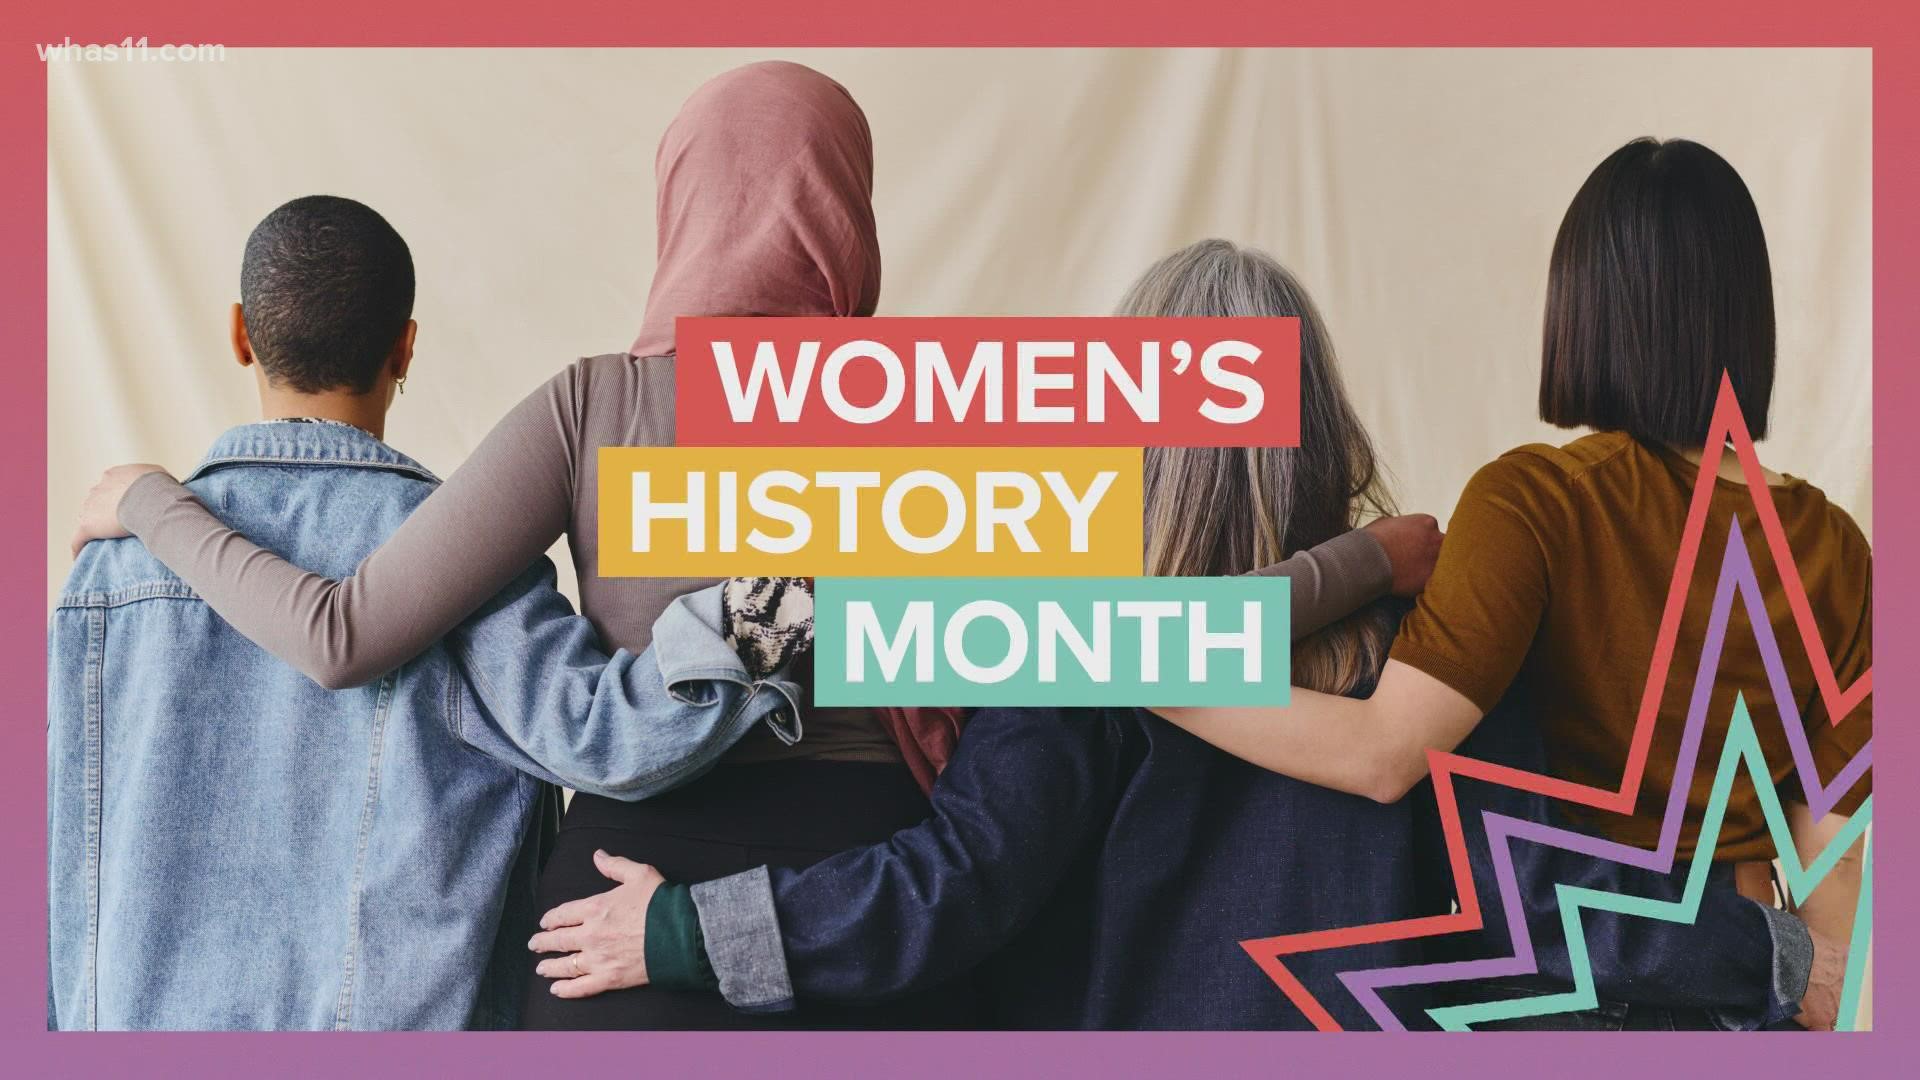 March is Women's History Month-which is dedicated to highlighting the contributions of women to events in history and society.